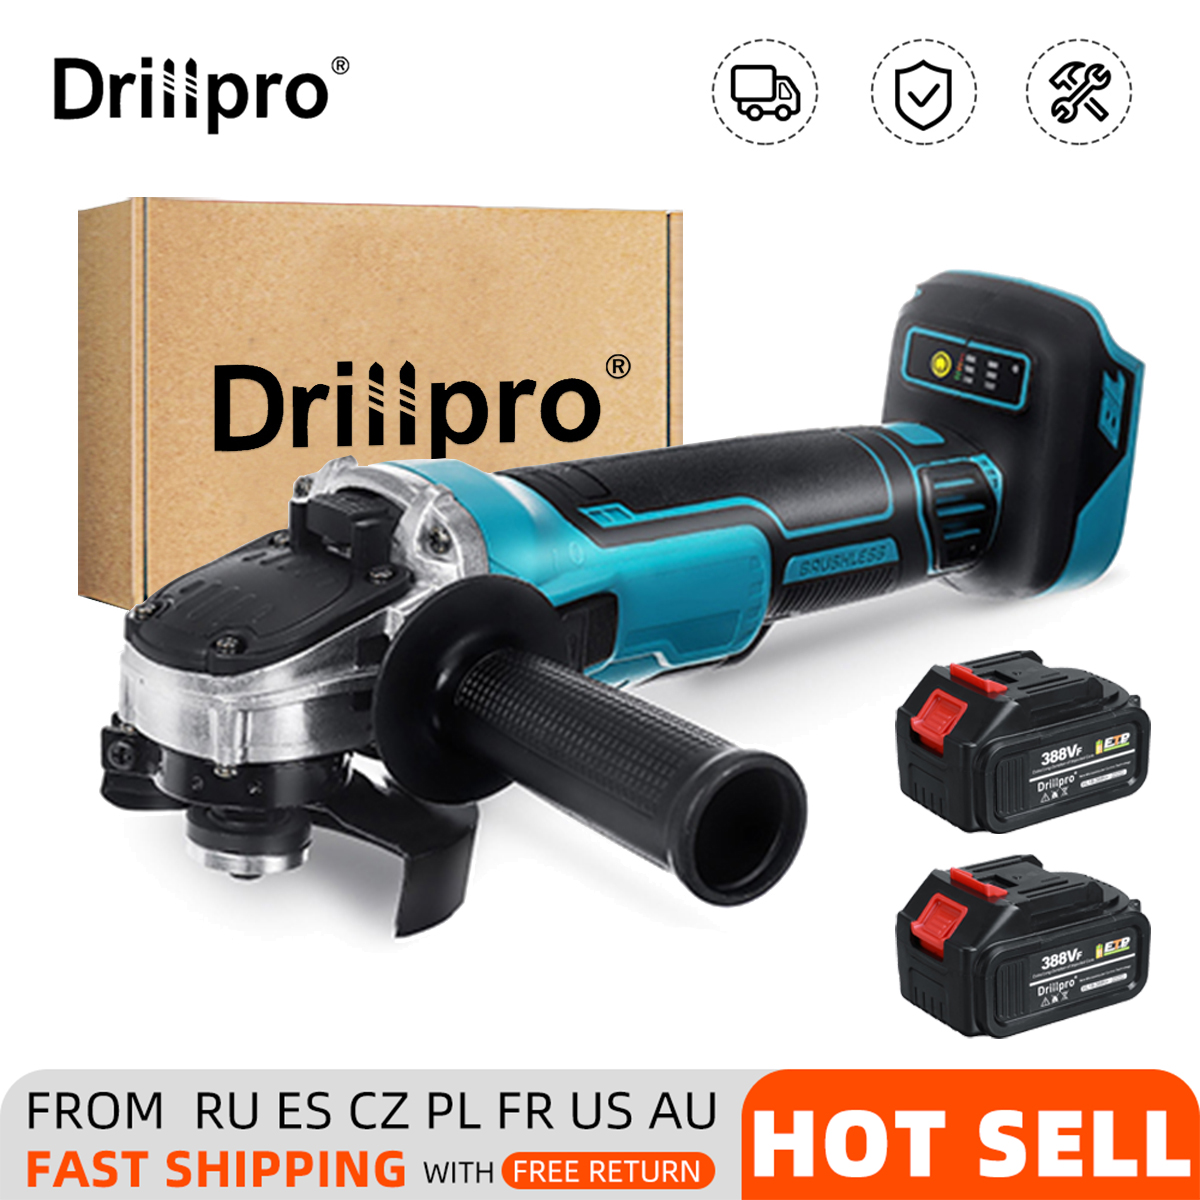 Drillpro-388VF-100mm125mm-Brushless-Angle-Grinder-Rechargeable-Electric-Cutting-Grinding-Tool-W-12-B-1861855-3